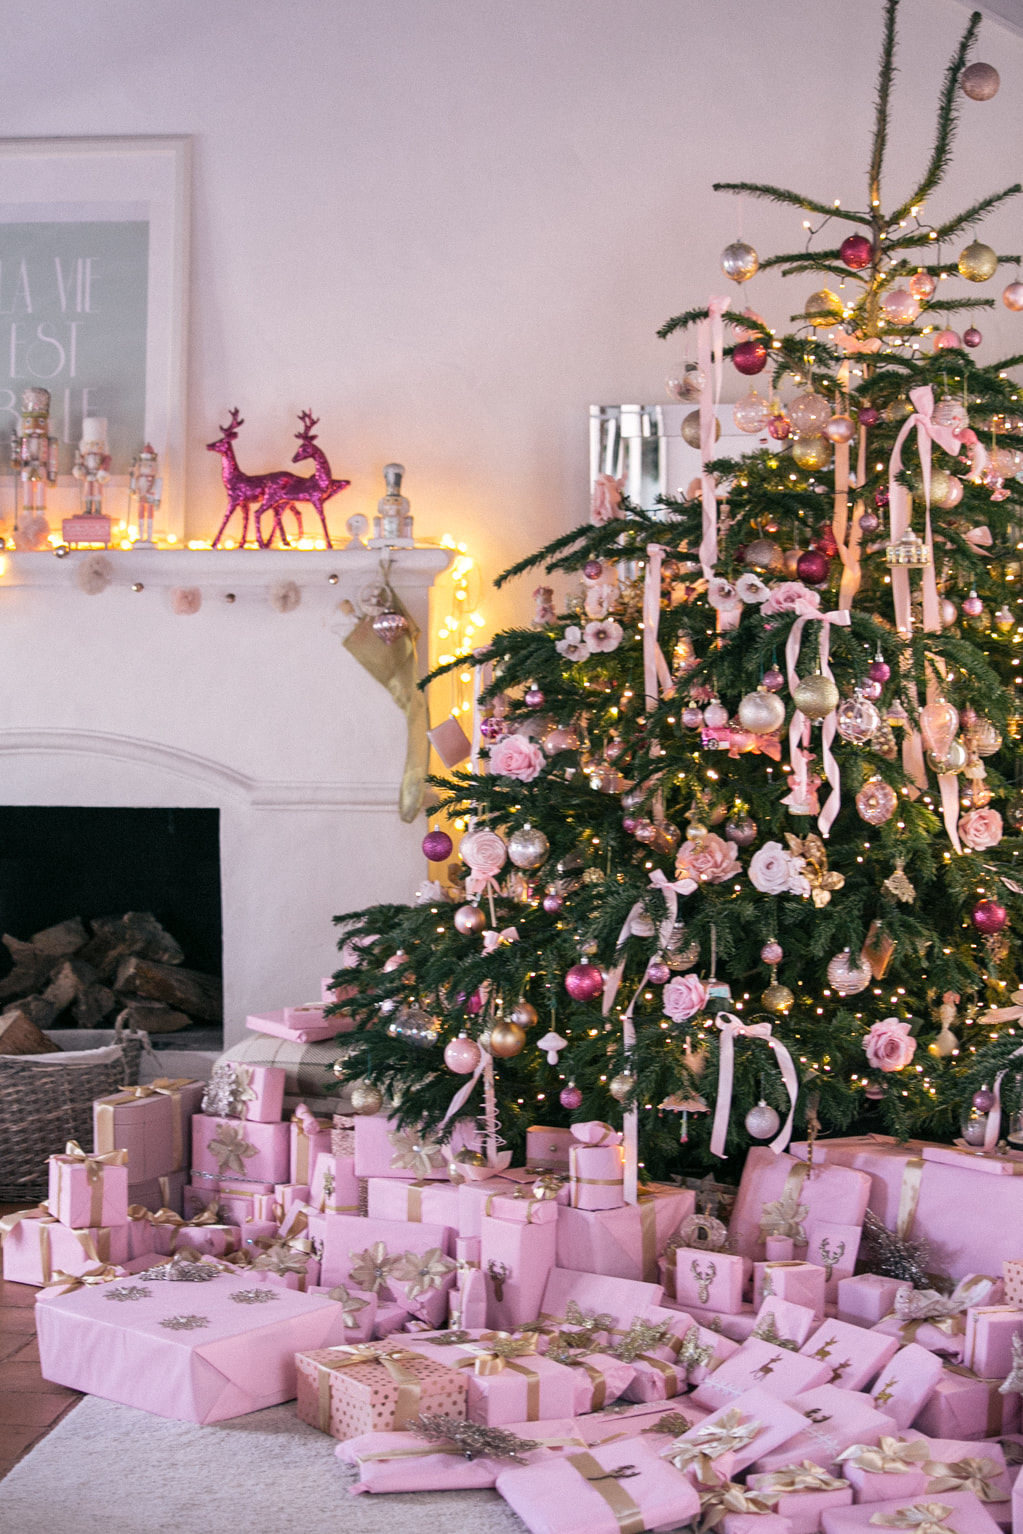 How to decorate your bedroom for Christmas! by The Belle Blog